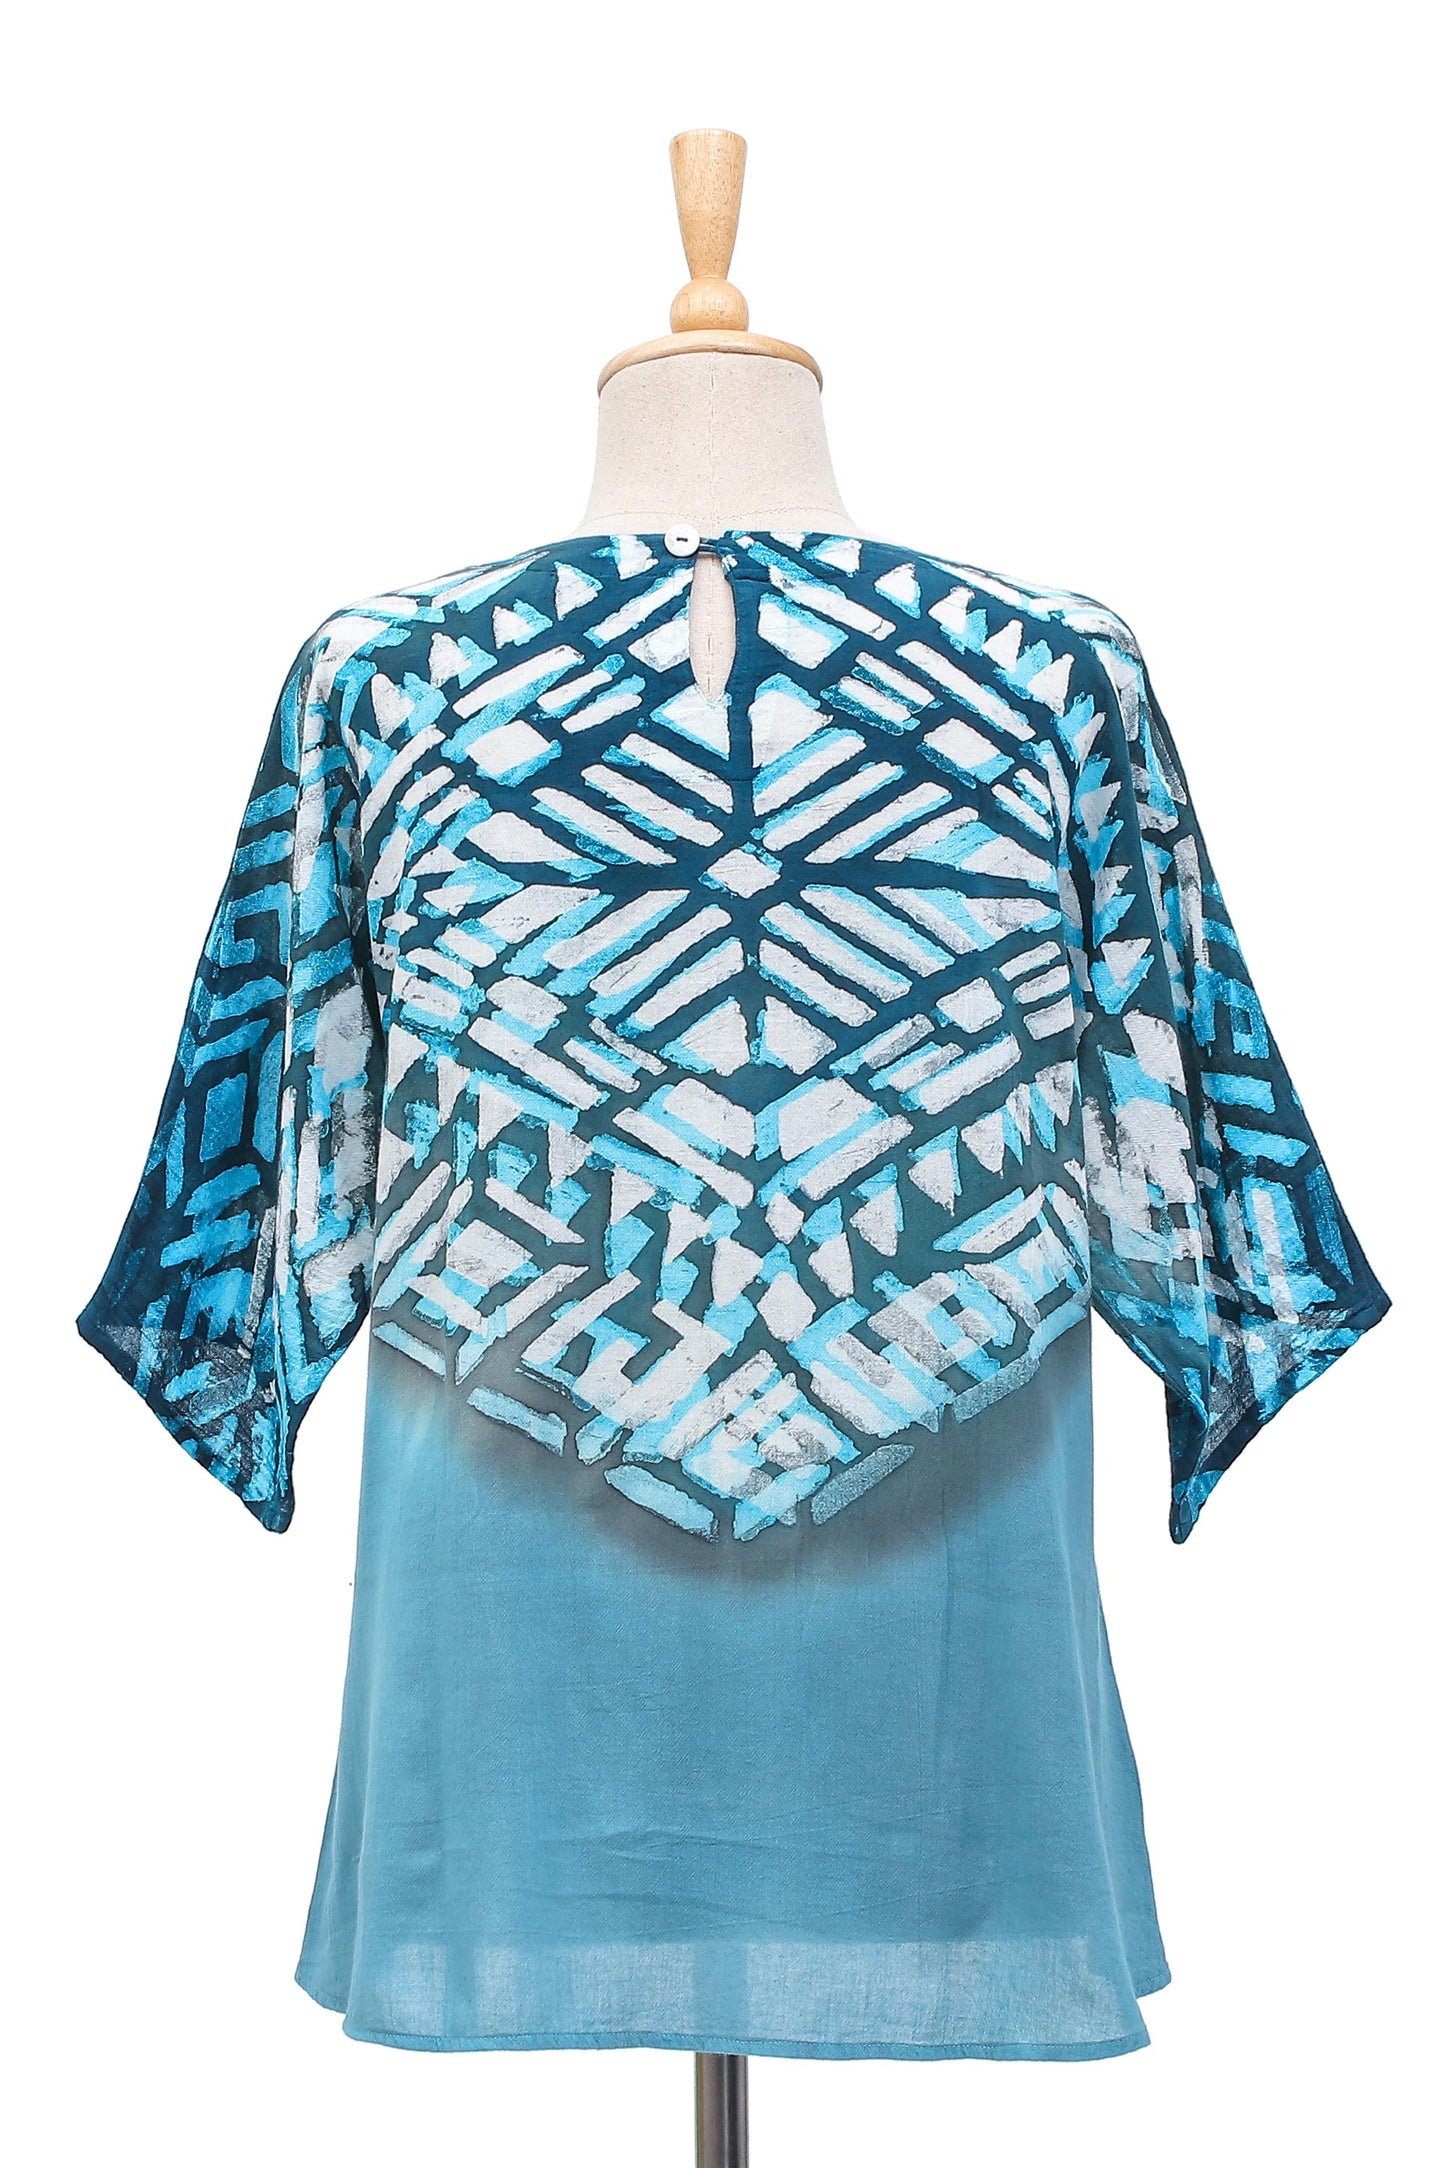 Blue Illusion Blue Cotton Batik Blouse Hand Crafted in Thailand